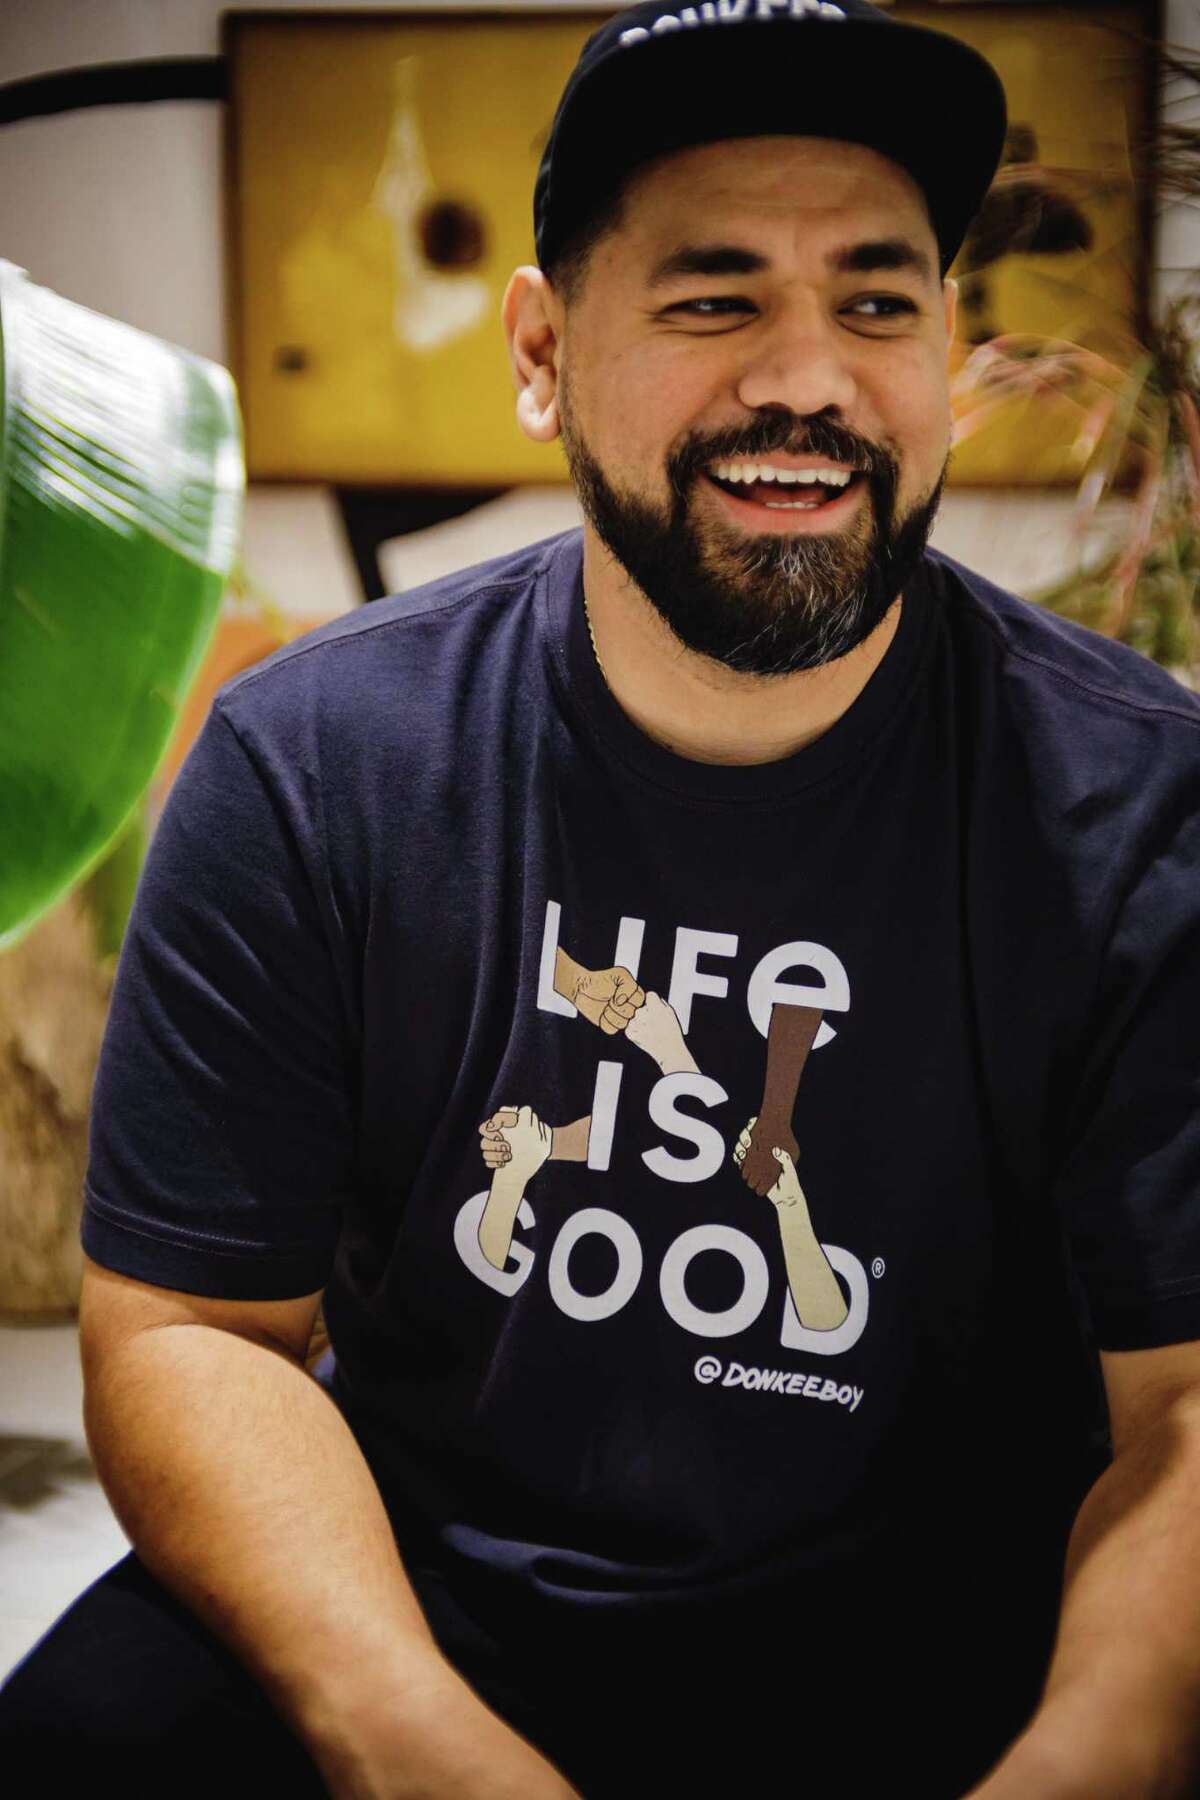 Houston artist Alex Roman designed a line of t-shirts for lifestyle brand Life is Good.